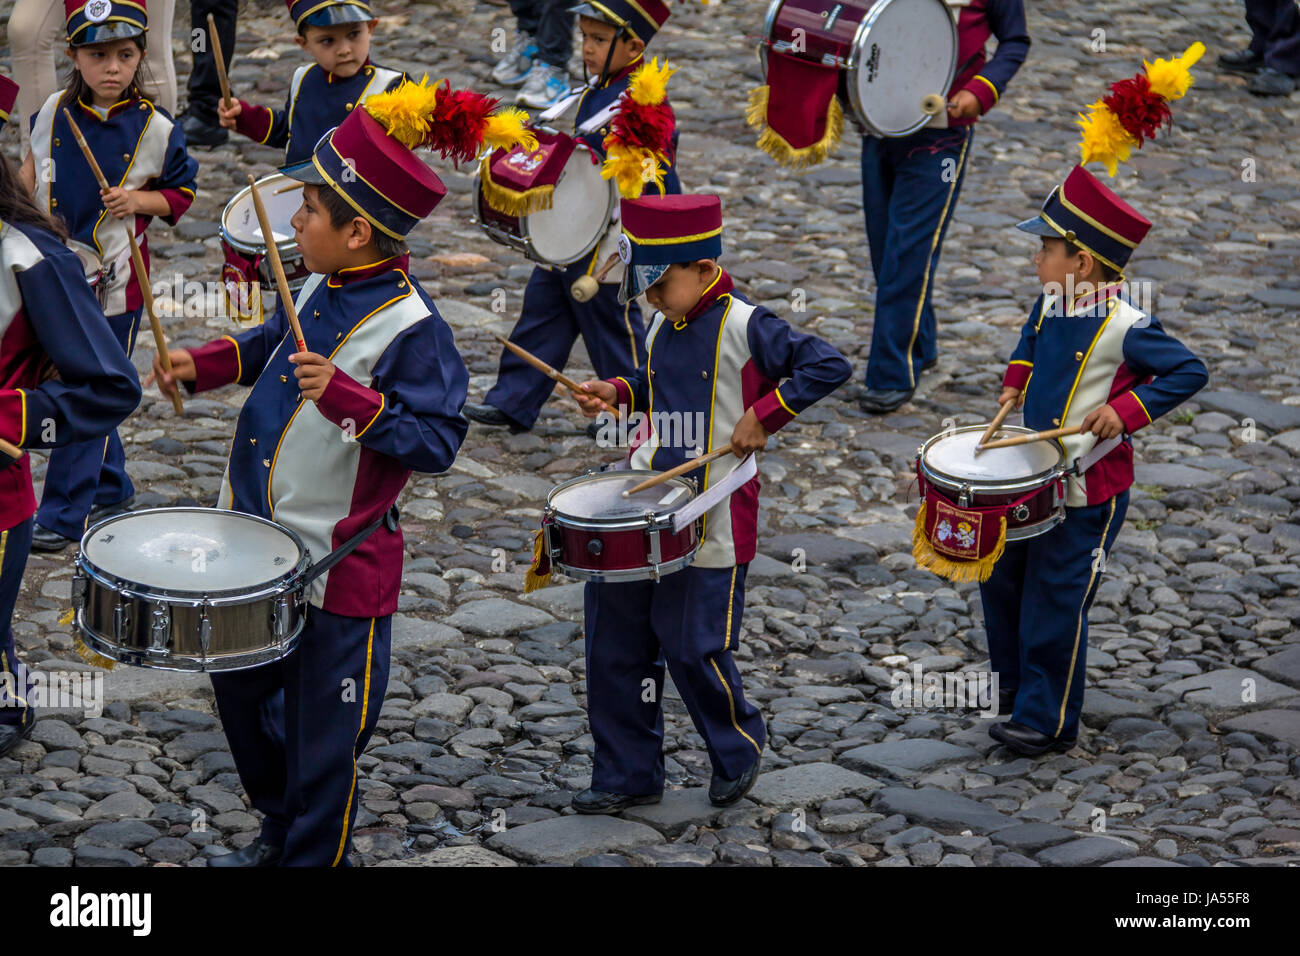 Group of small children Marching Band in Uniforms - Antigua, Guatemala Stock Photo